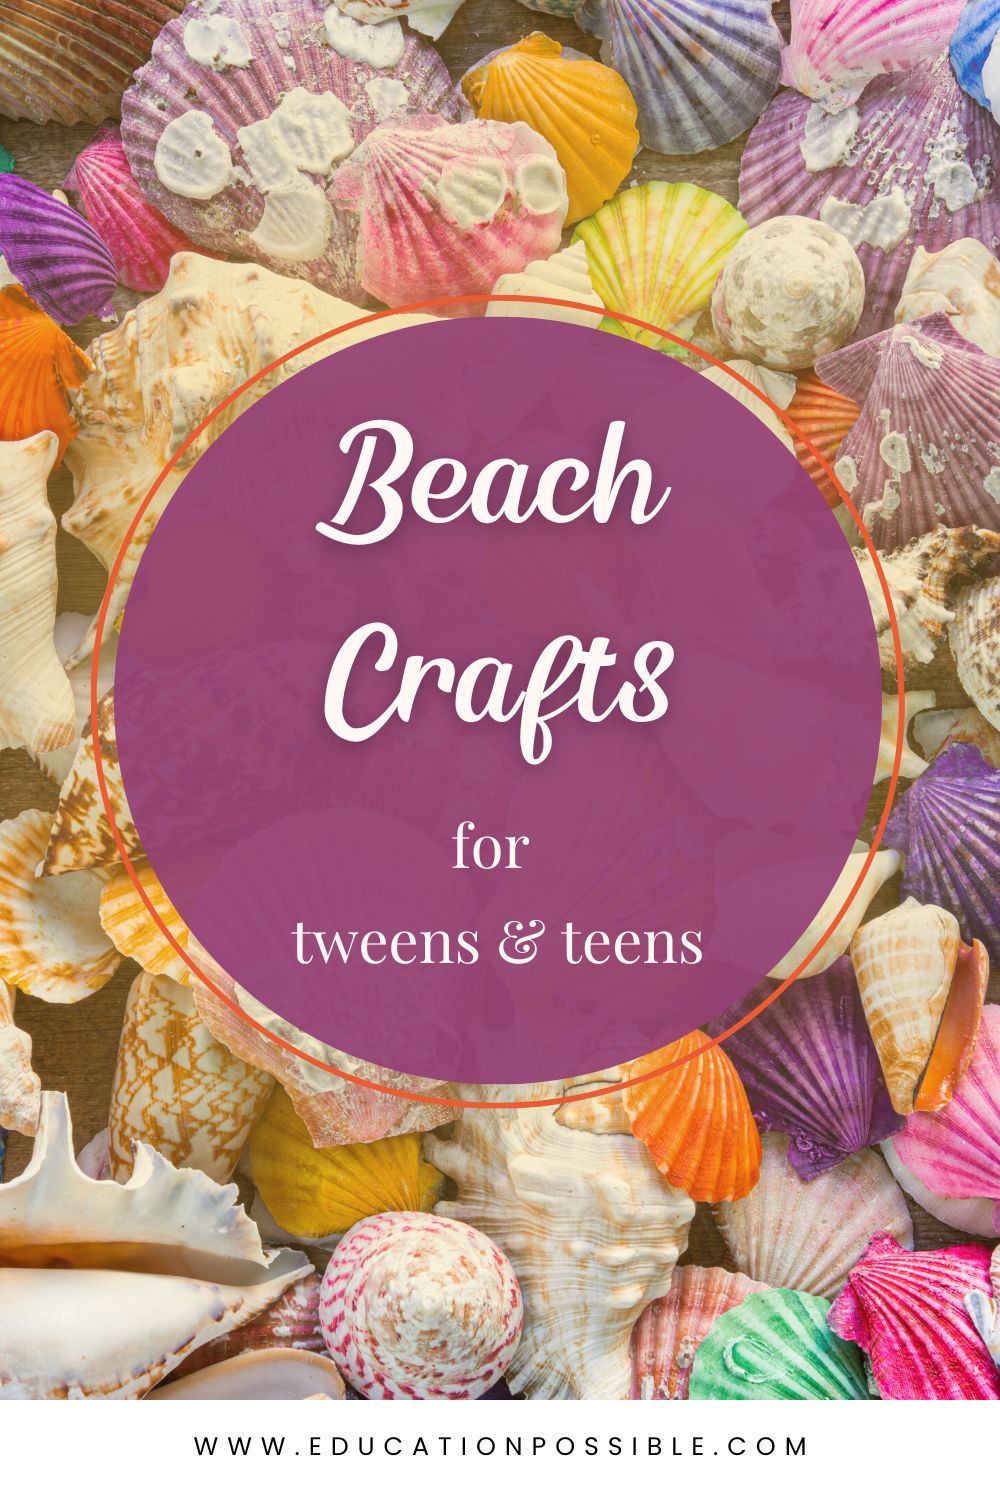 Beach Crafts for Teens